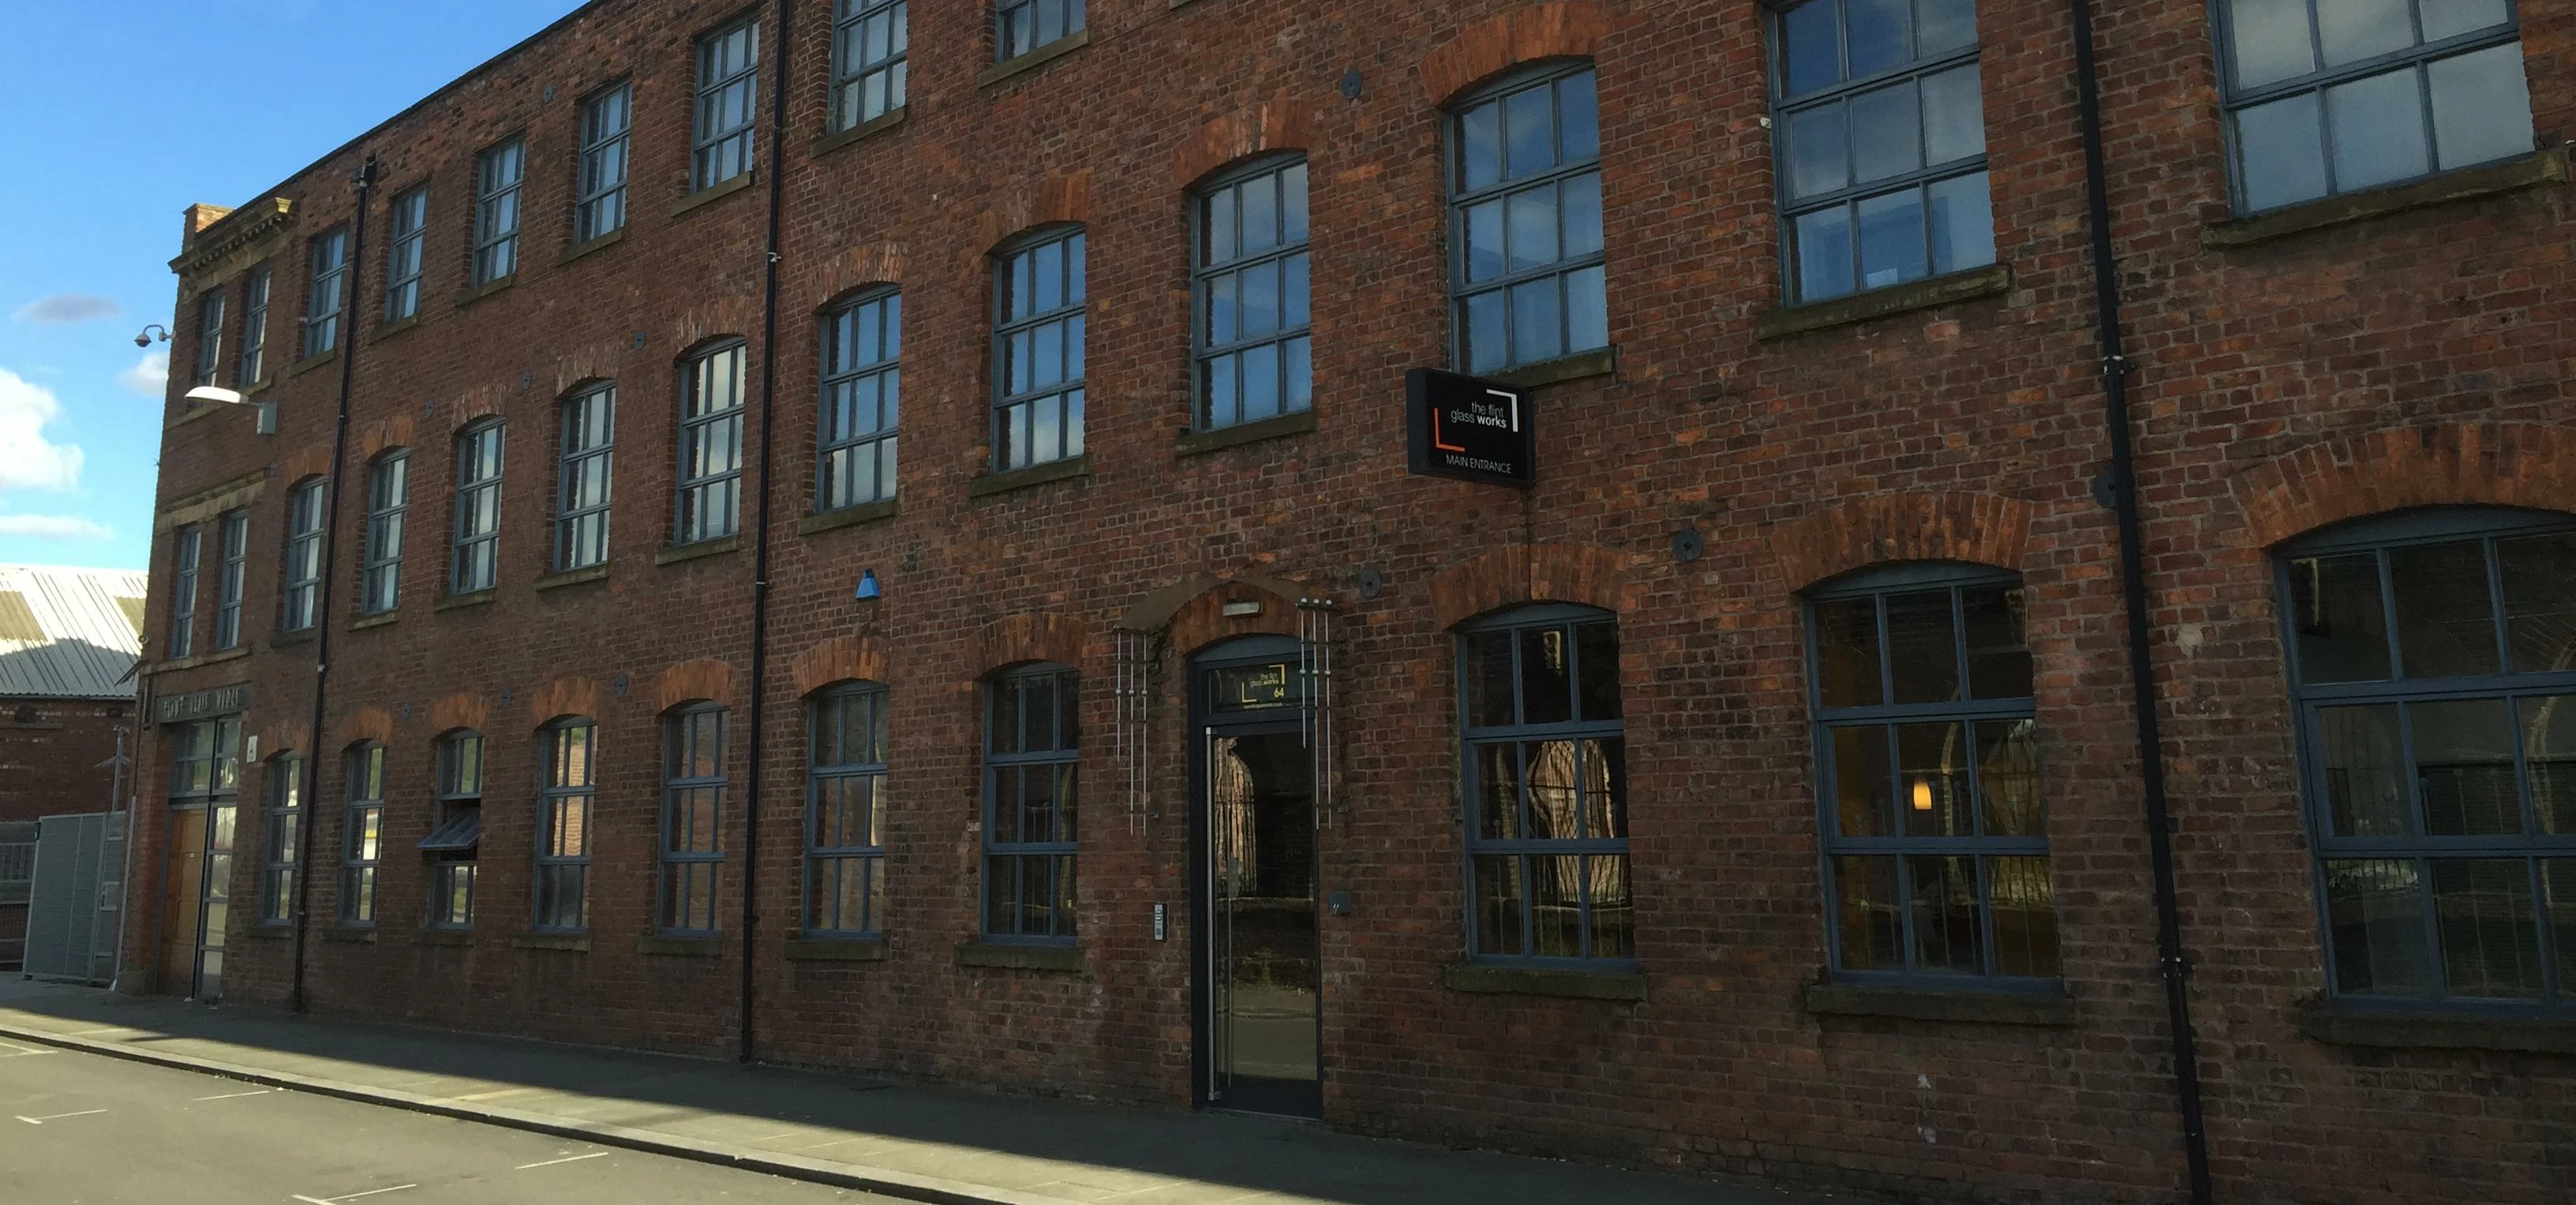 Custard's new base in the Northern Quarter